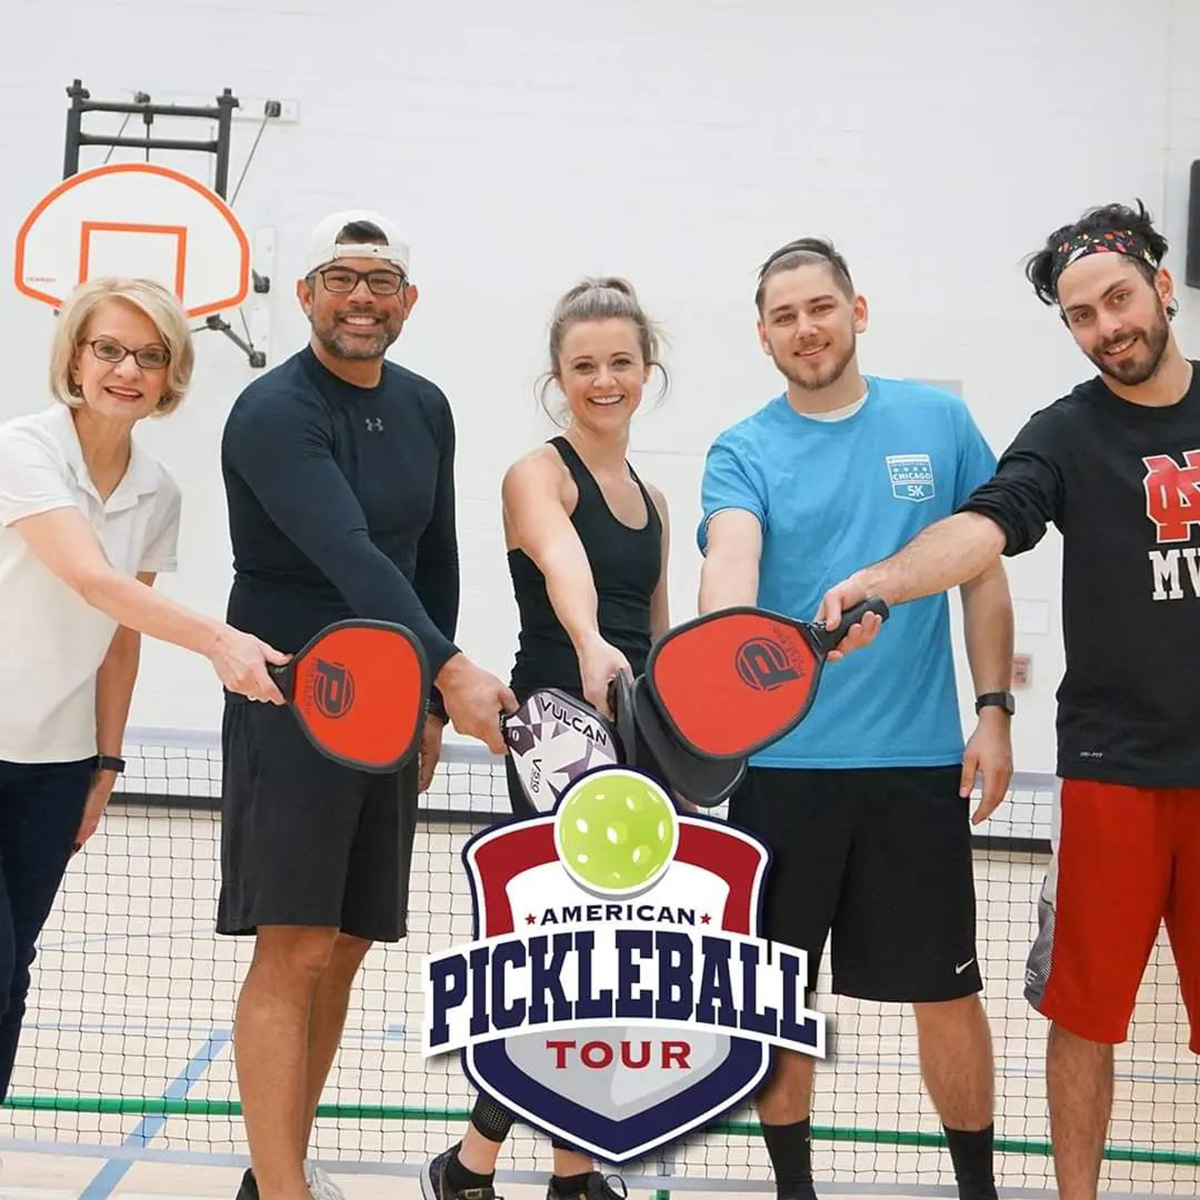 The+event+will+be+sure+to+put+a+smile+on+your+face.%0AUsed+with+permission+from+The+American+Pickleball+Tour.